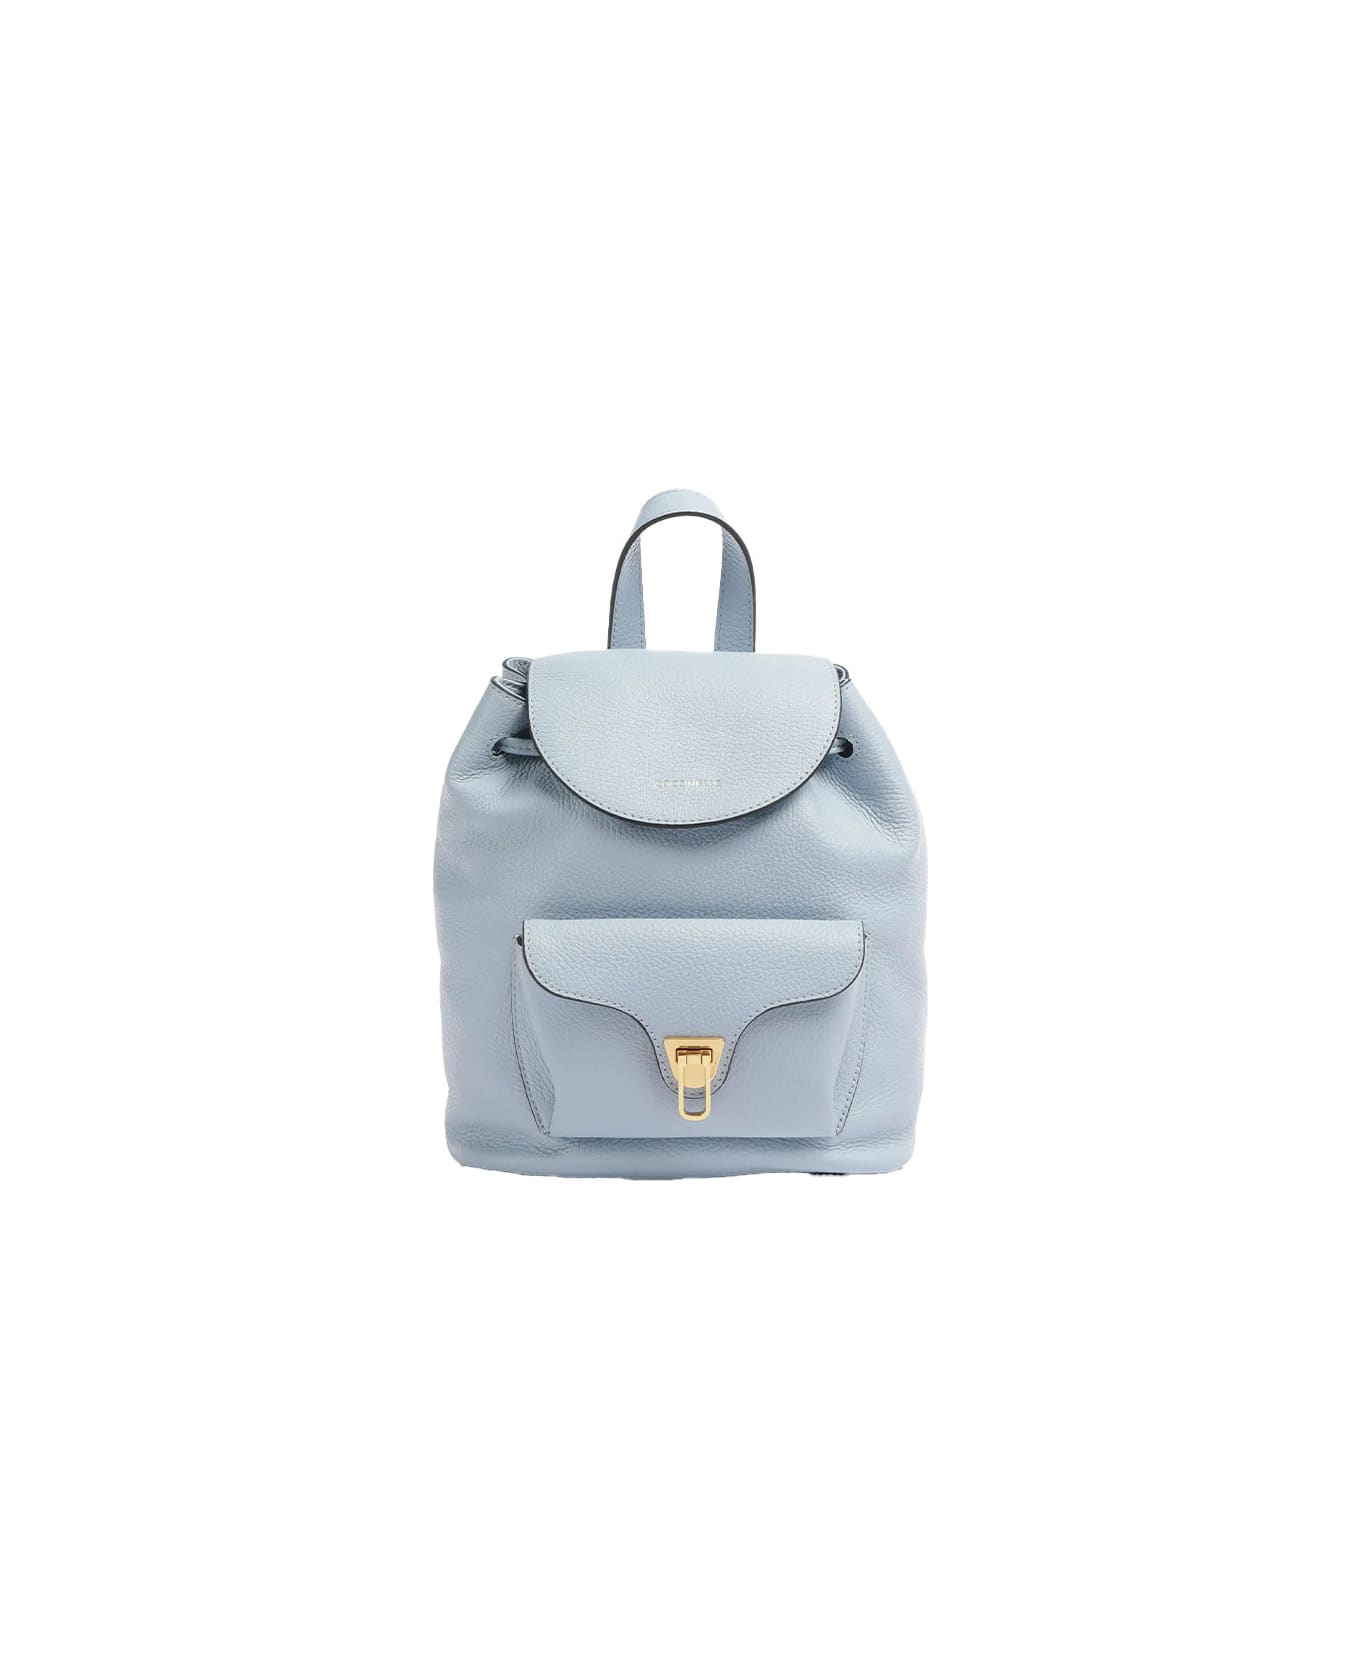 Coccinelle Beat Soft Backpack In Leather - Mist blue